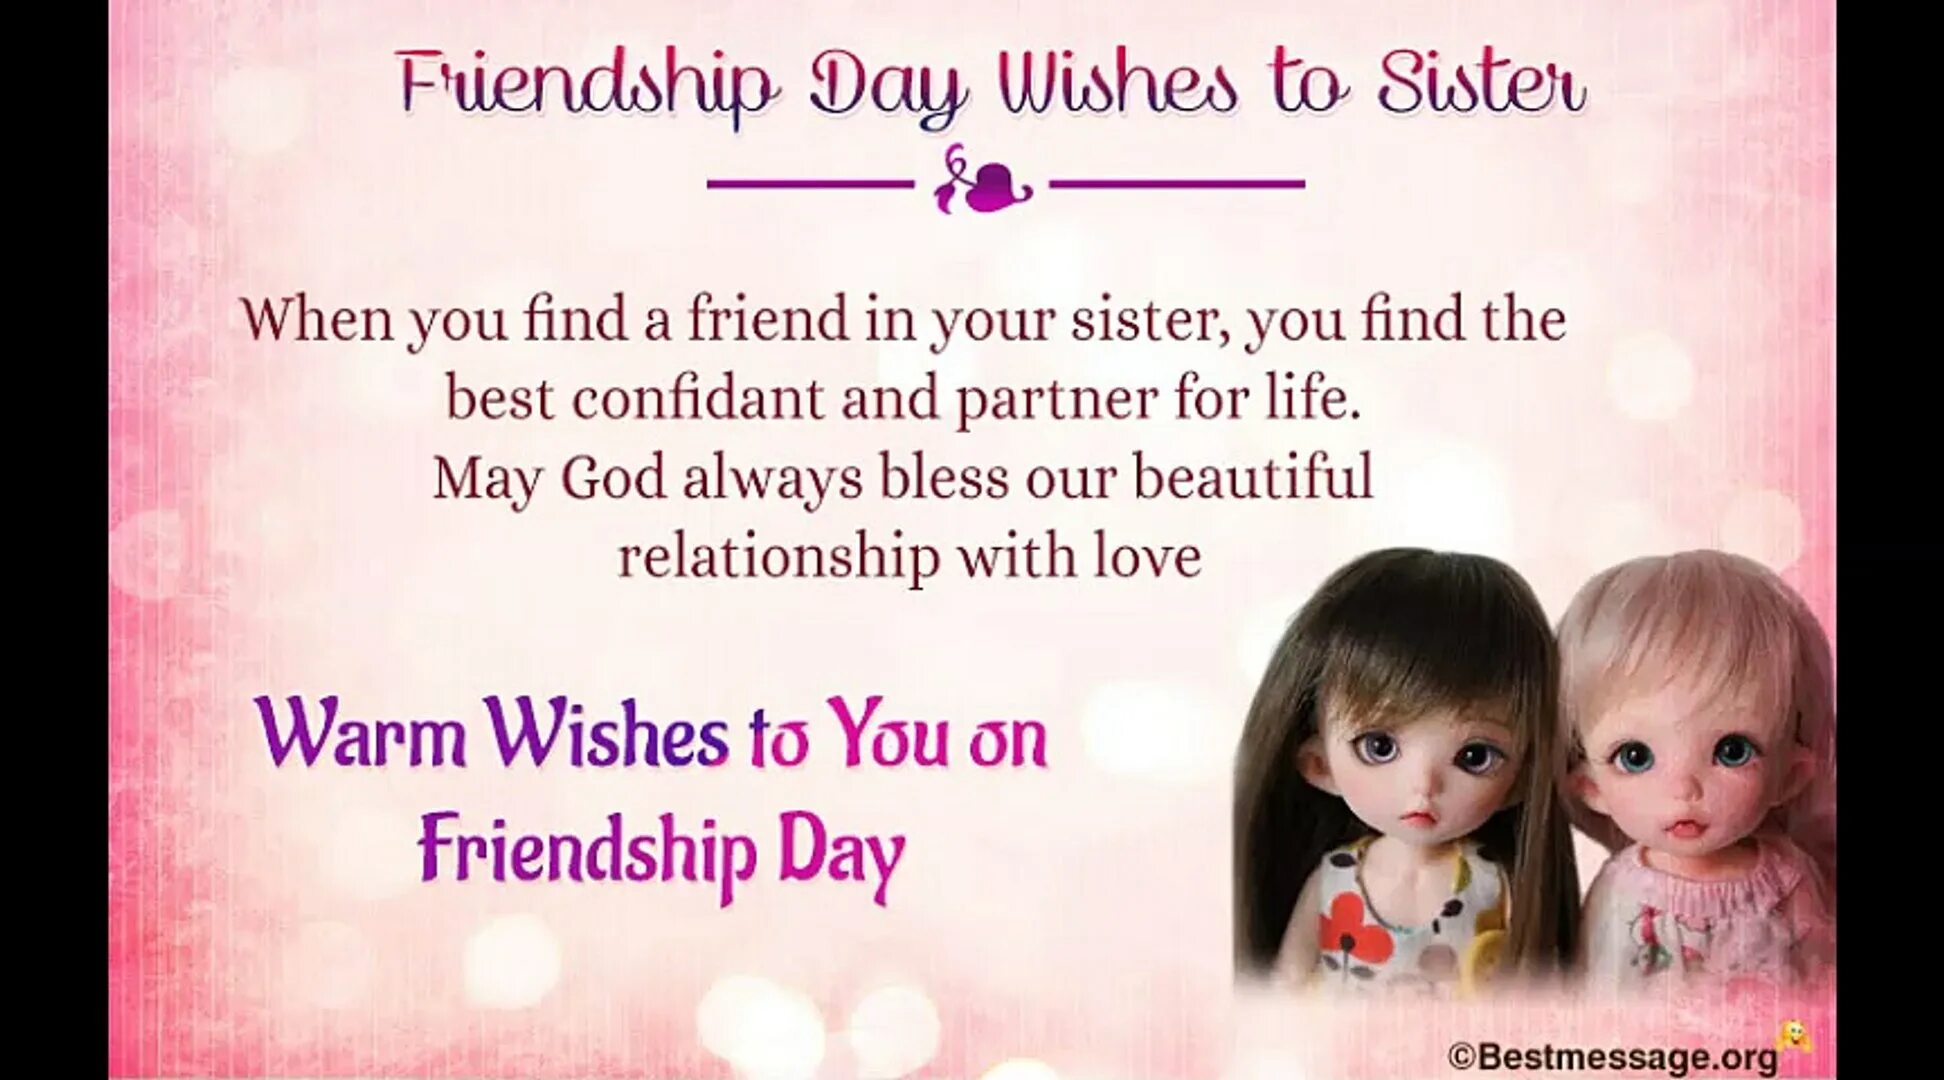 Sister Wish. My friend is Day. Friendship message quotes. Greetings about Friendship. Best friend message